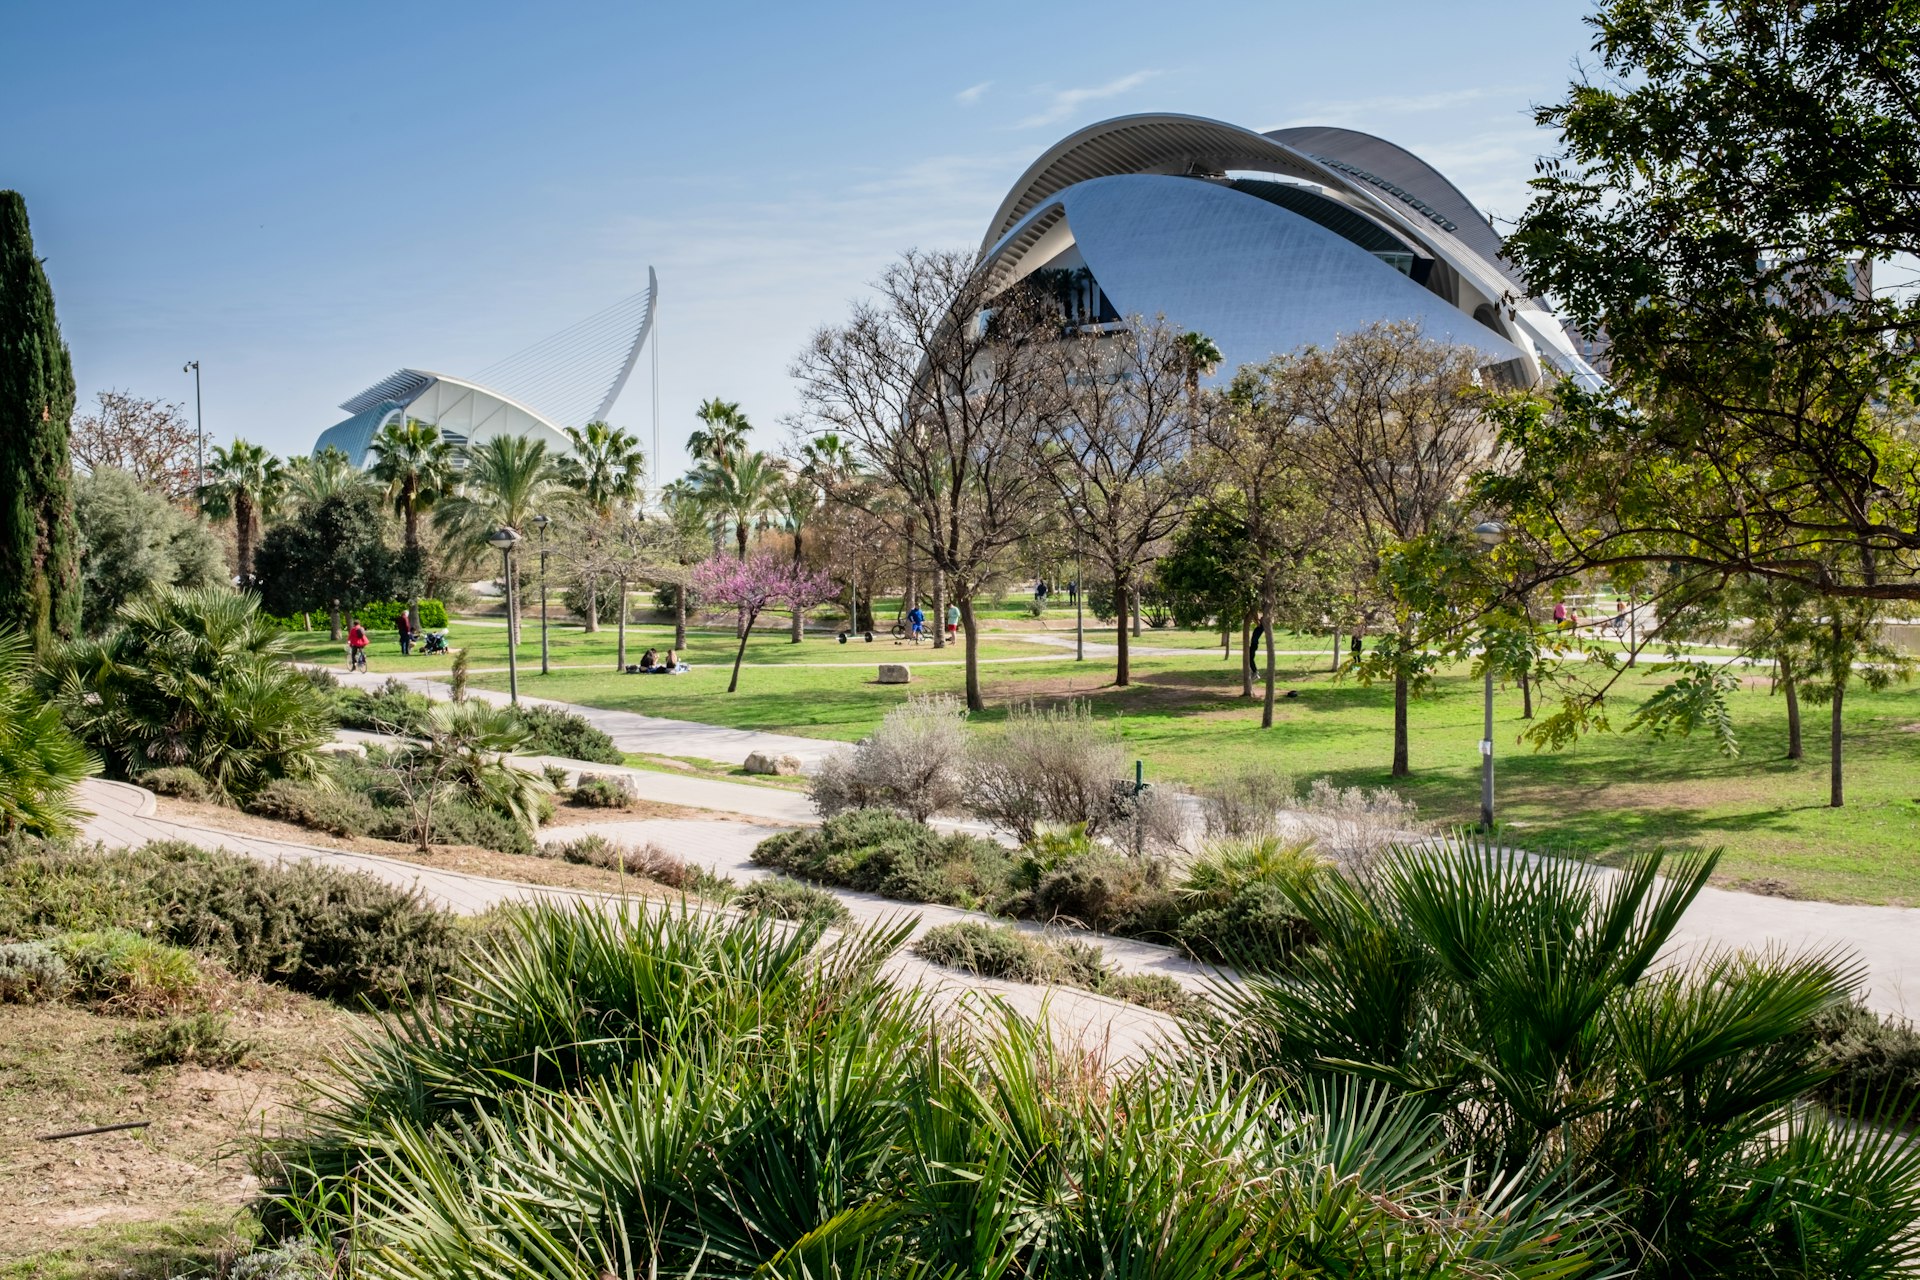 The Jardí del Túria (Túria gardens), a public park with cycle ways, footpaths, sports facilities as well as the futuristic City of Arts and Sciences in the background. 